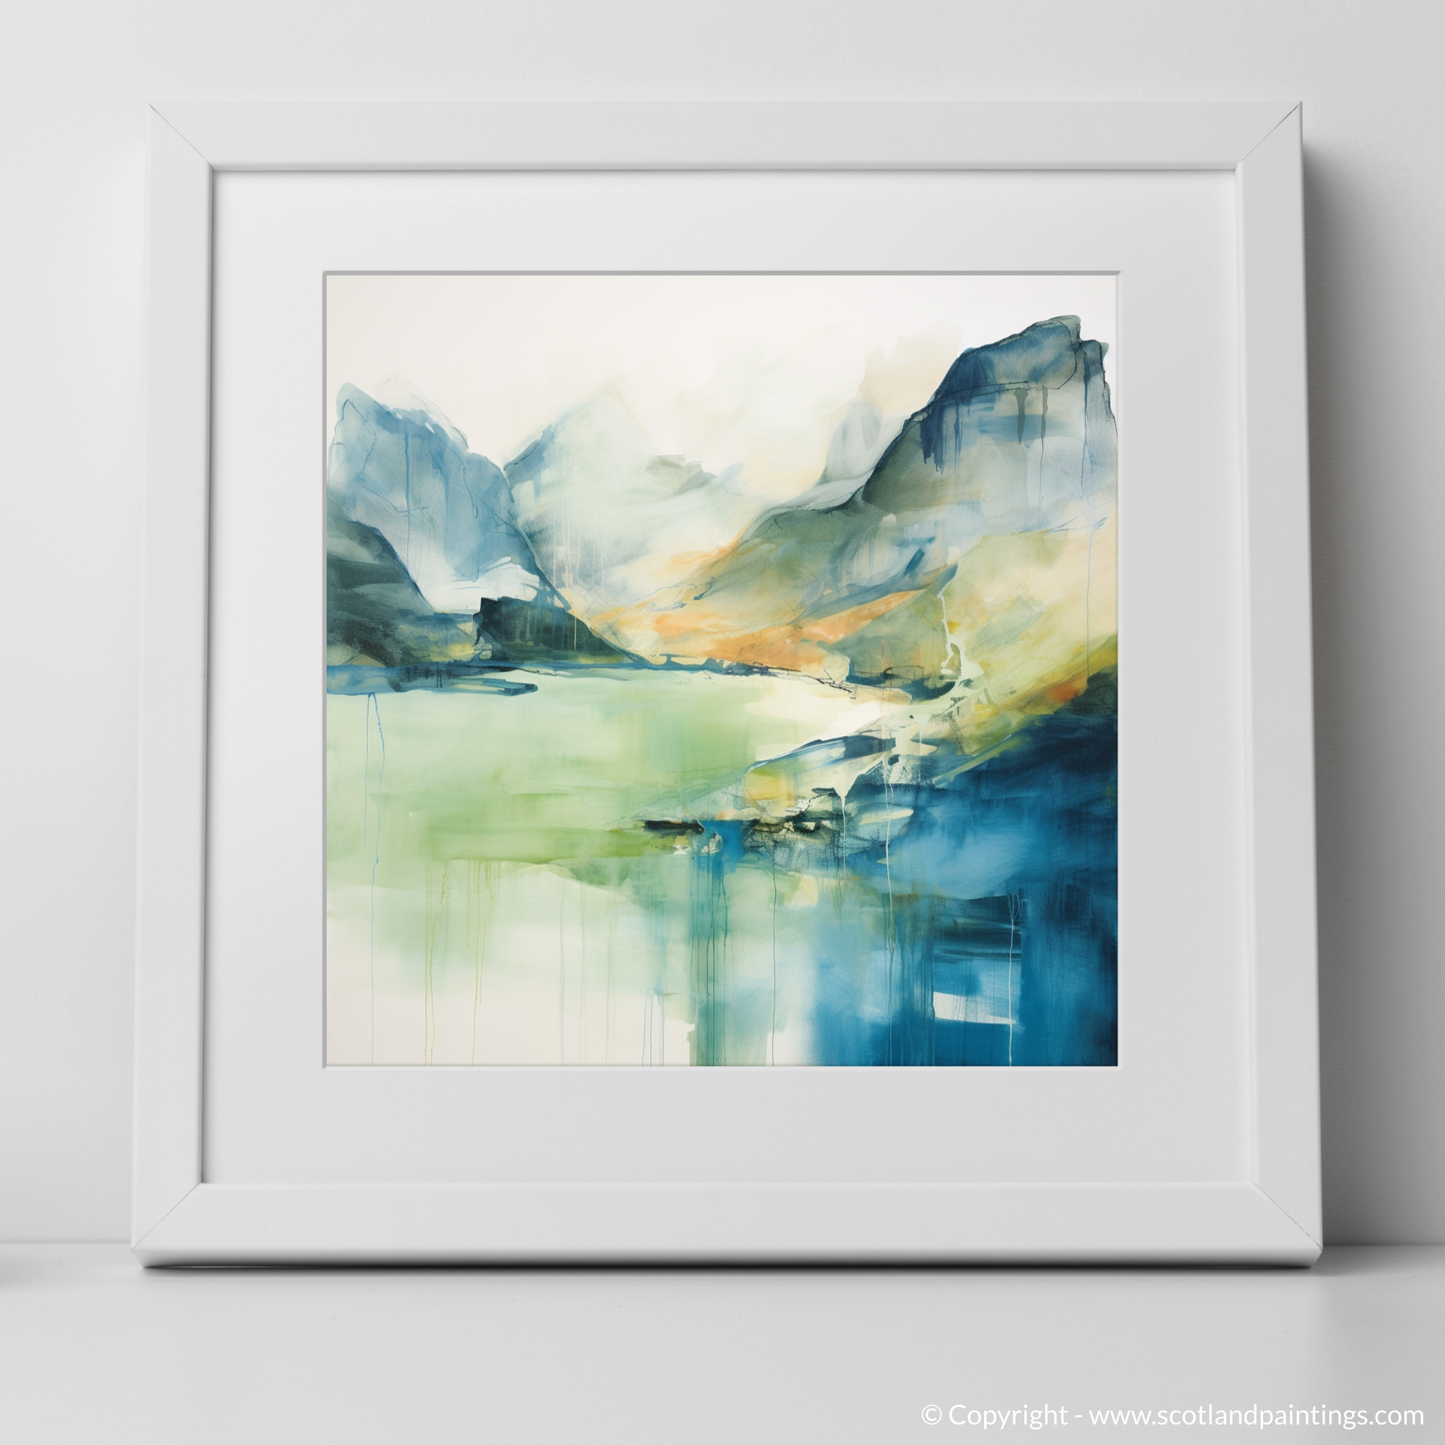 Mystic Waters of Loch Maree: An Abstract Highland Reverie